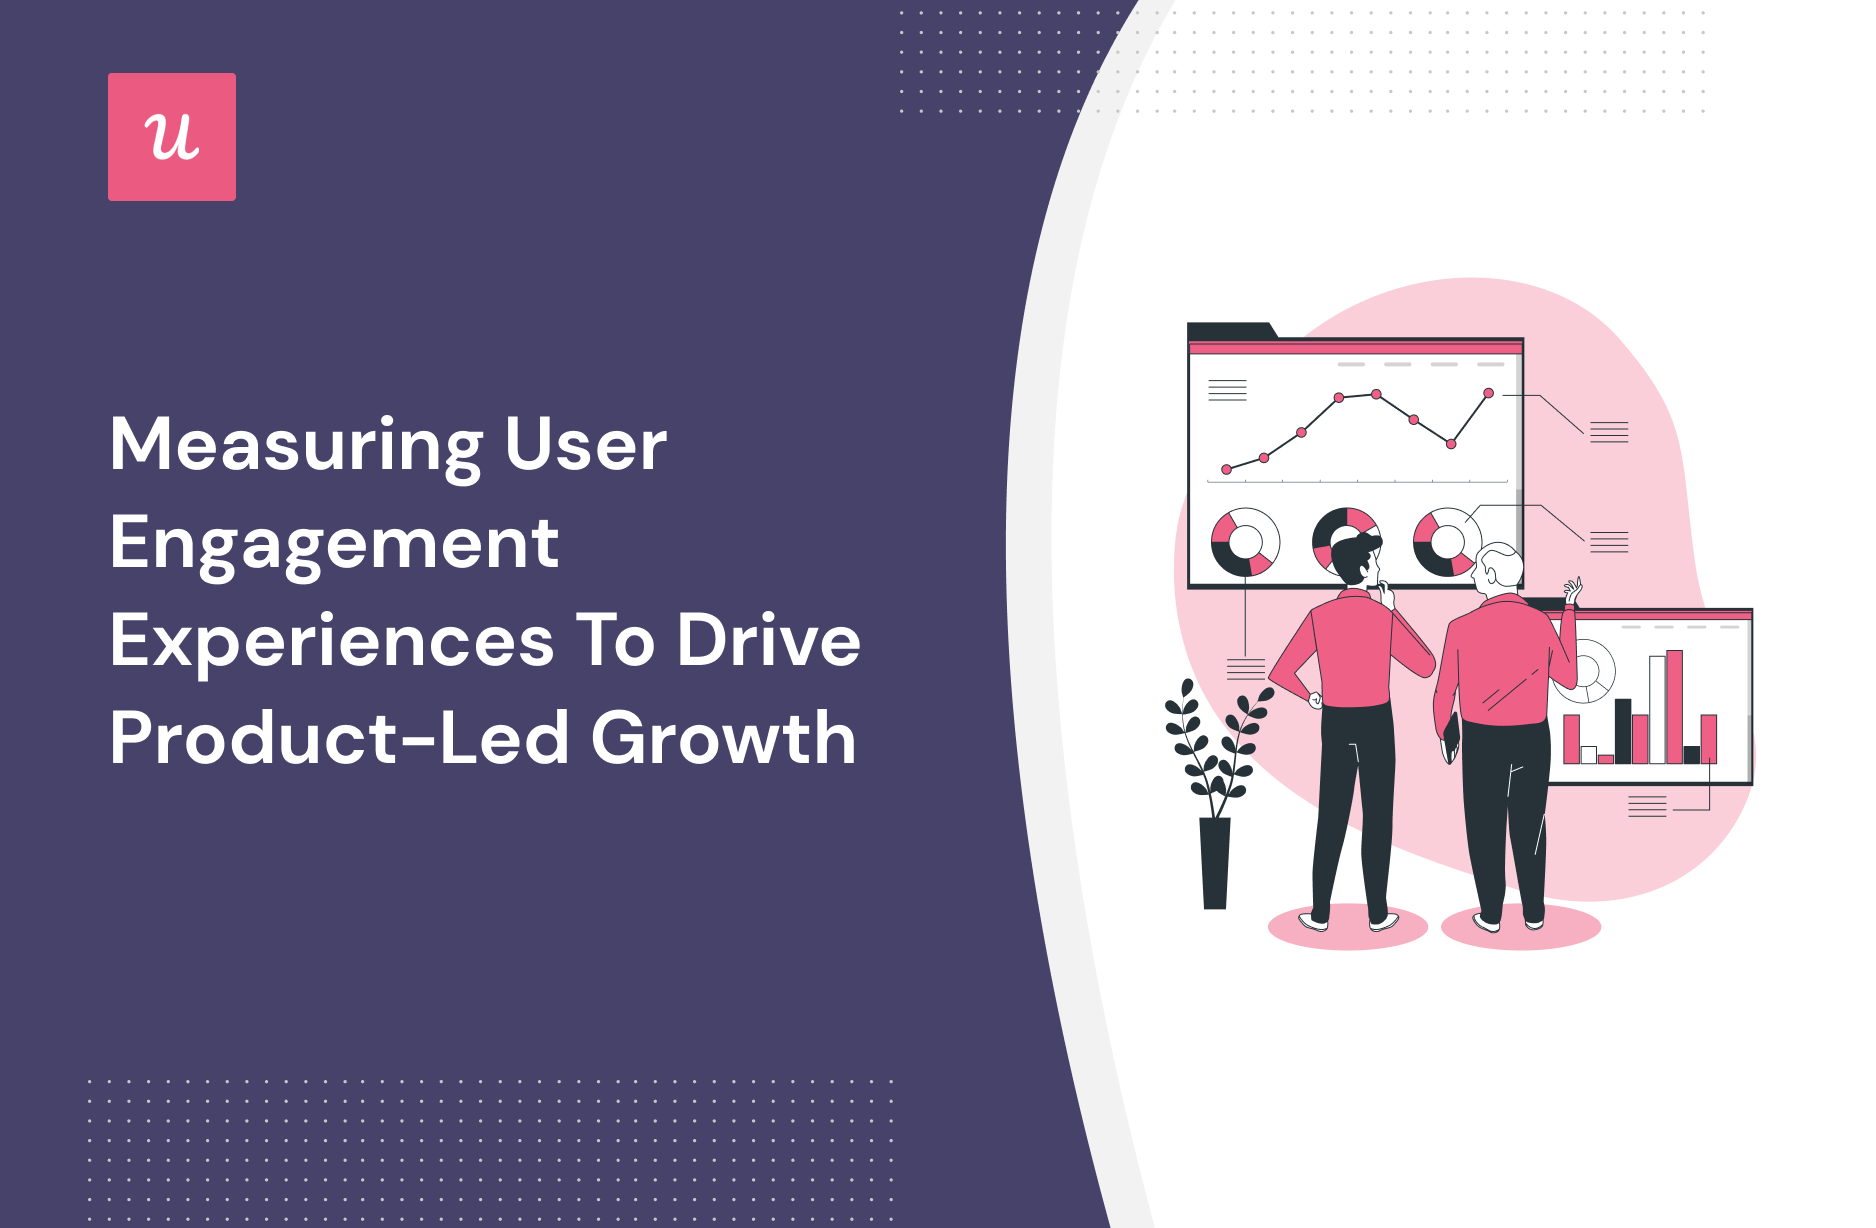 Measuring User Engagement Experiences to Drive Product-Led Growth